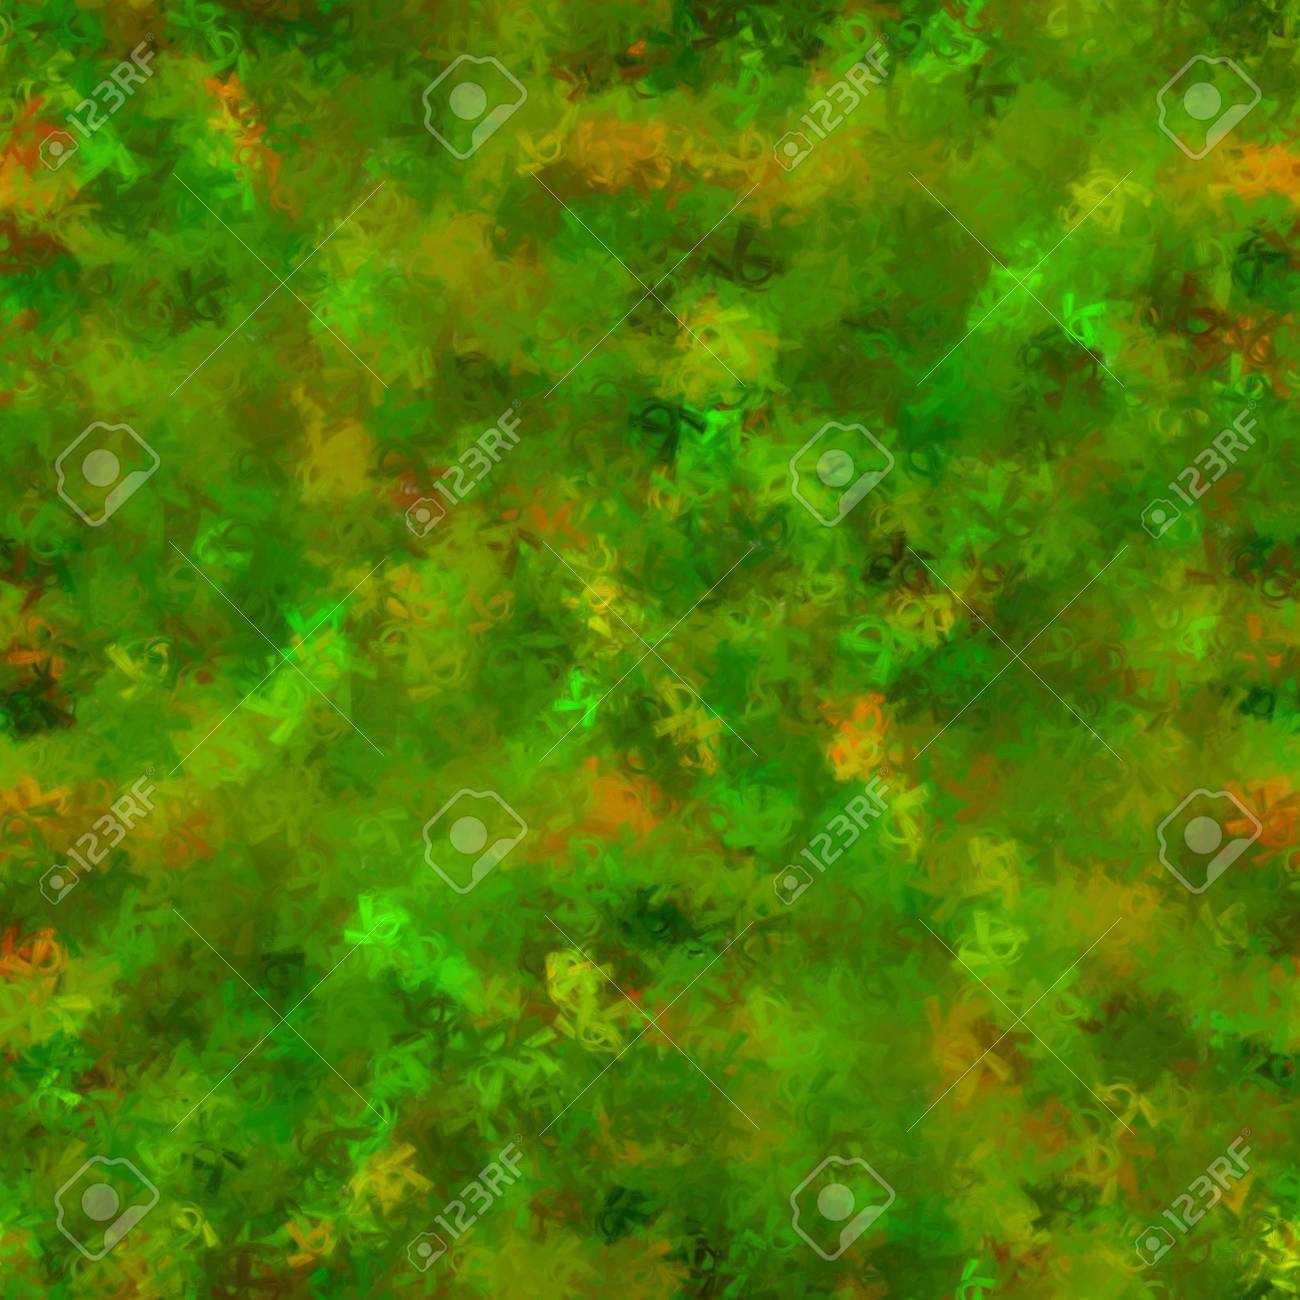 Green Seamless Tile Able Abstract Fancy Fuzzy As Mostly